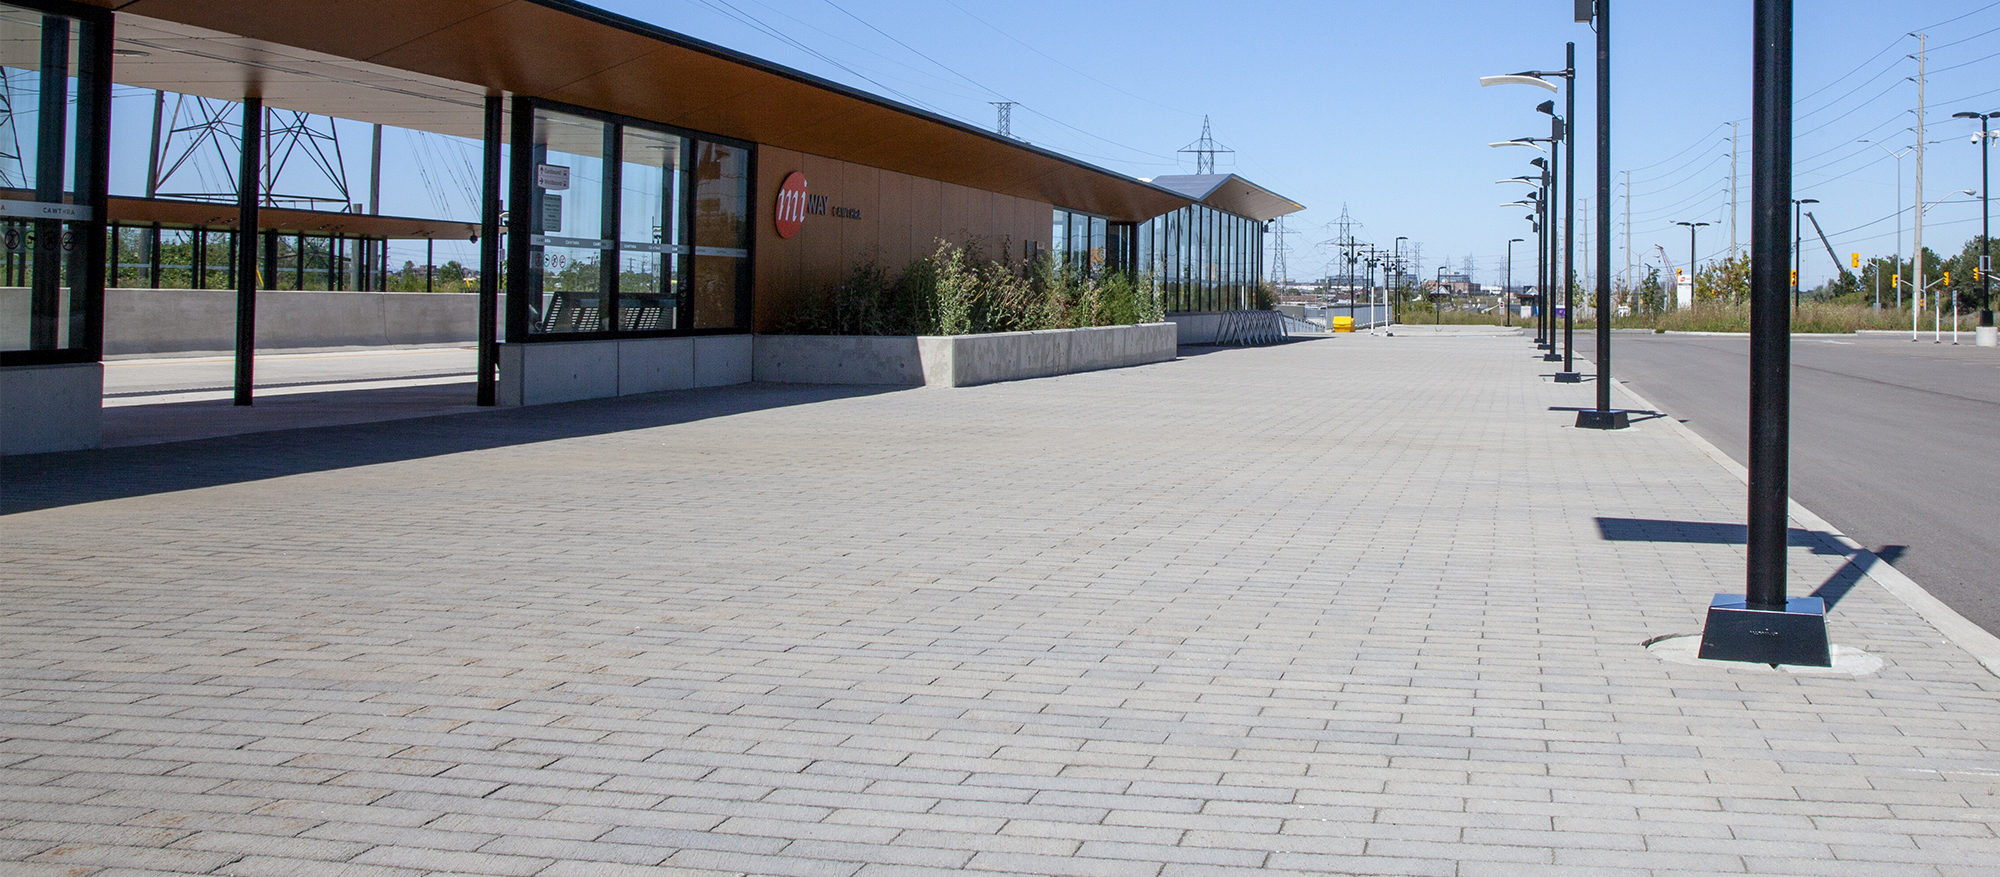 A row of streetlights cast long shadows over a bed of grey Il Campo pavers outside the station's sleek entrance.